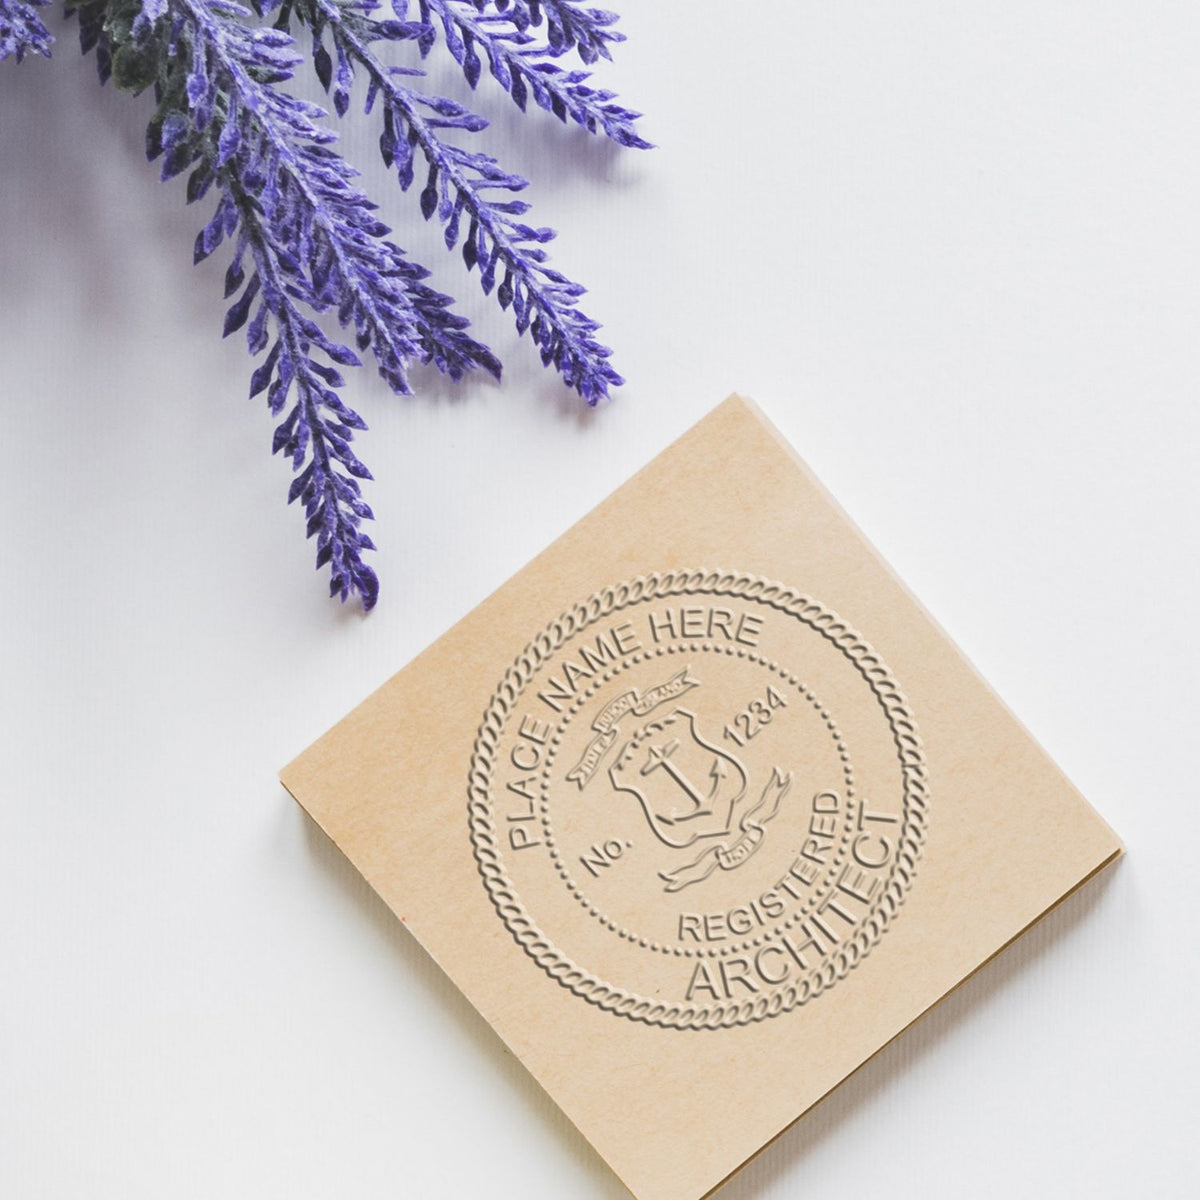 An in use photo of the Gift Rhode Island Architect Seal showing a sample imprint on a cardstock